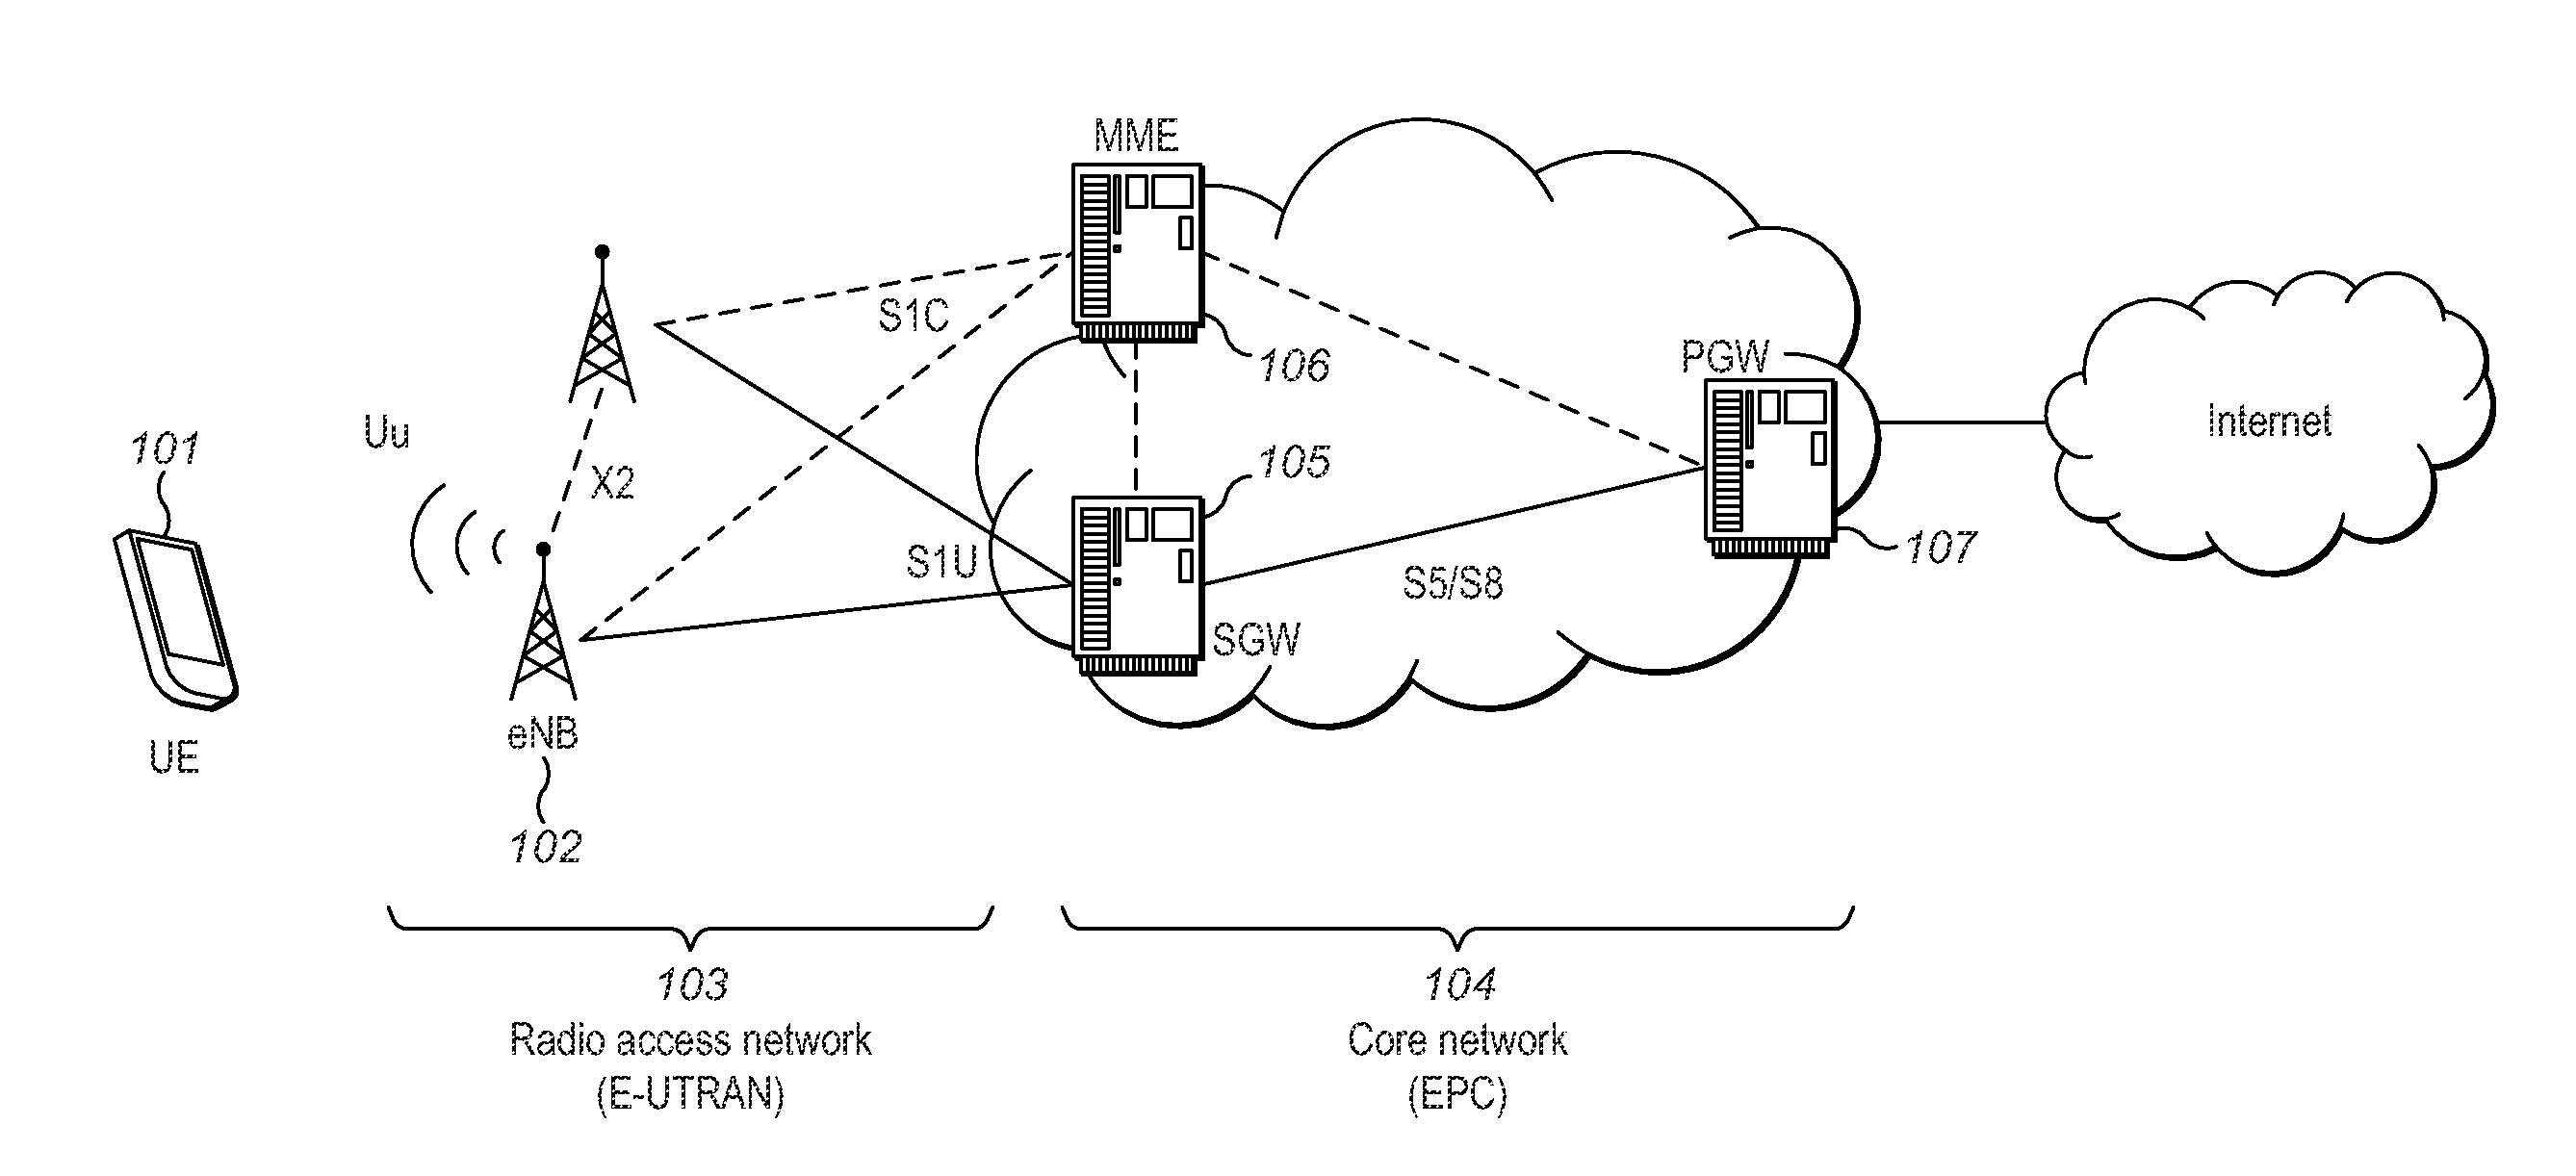 Method Implemented in an eNodeB Base Station